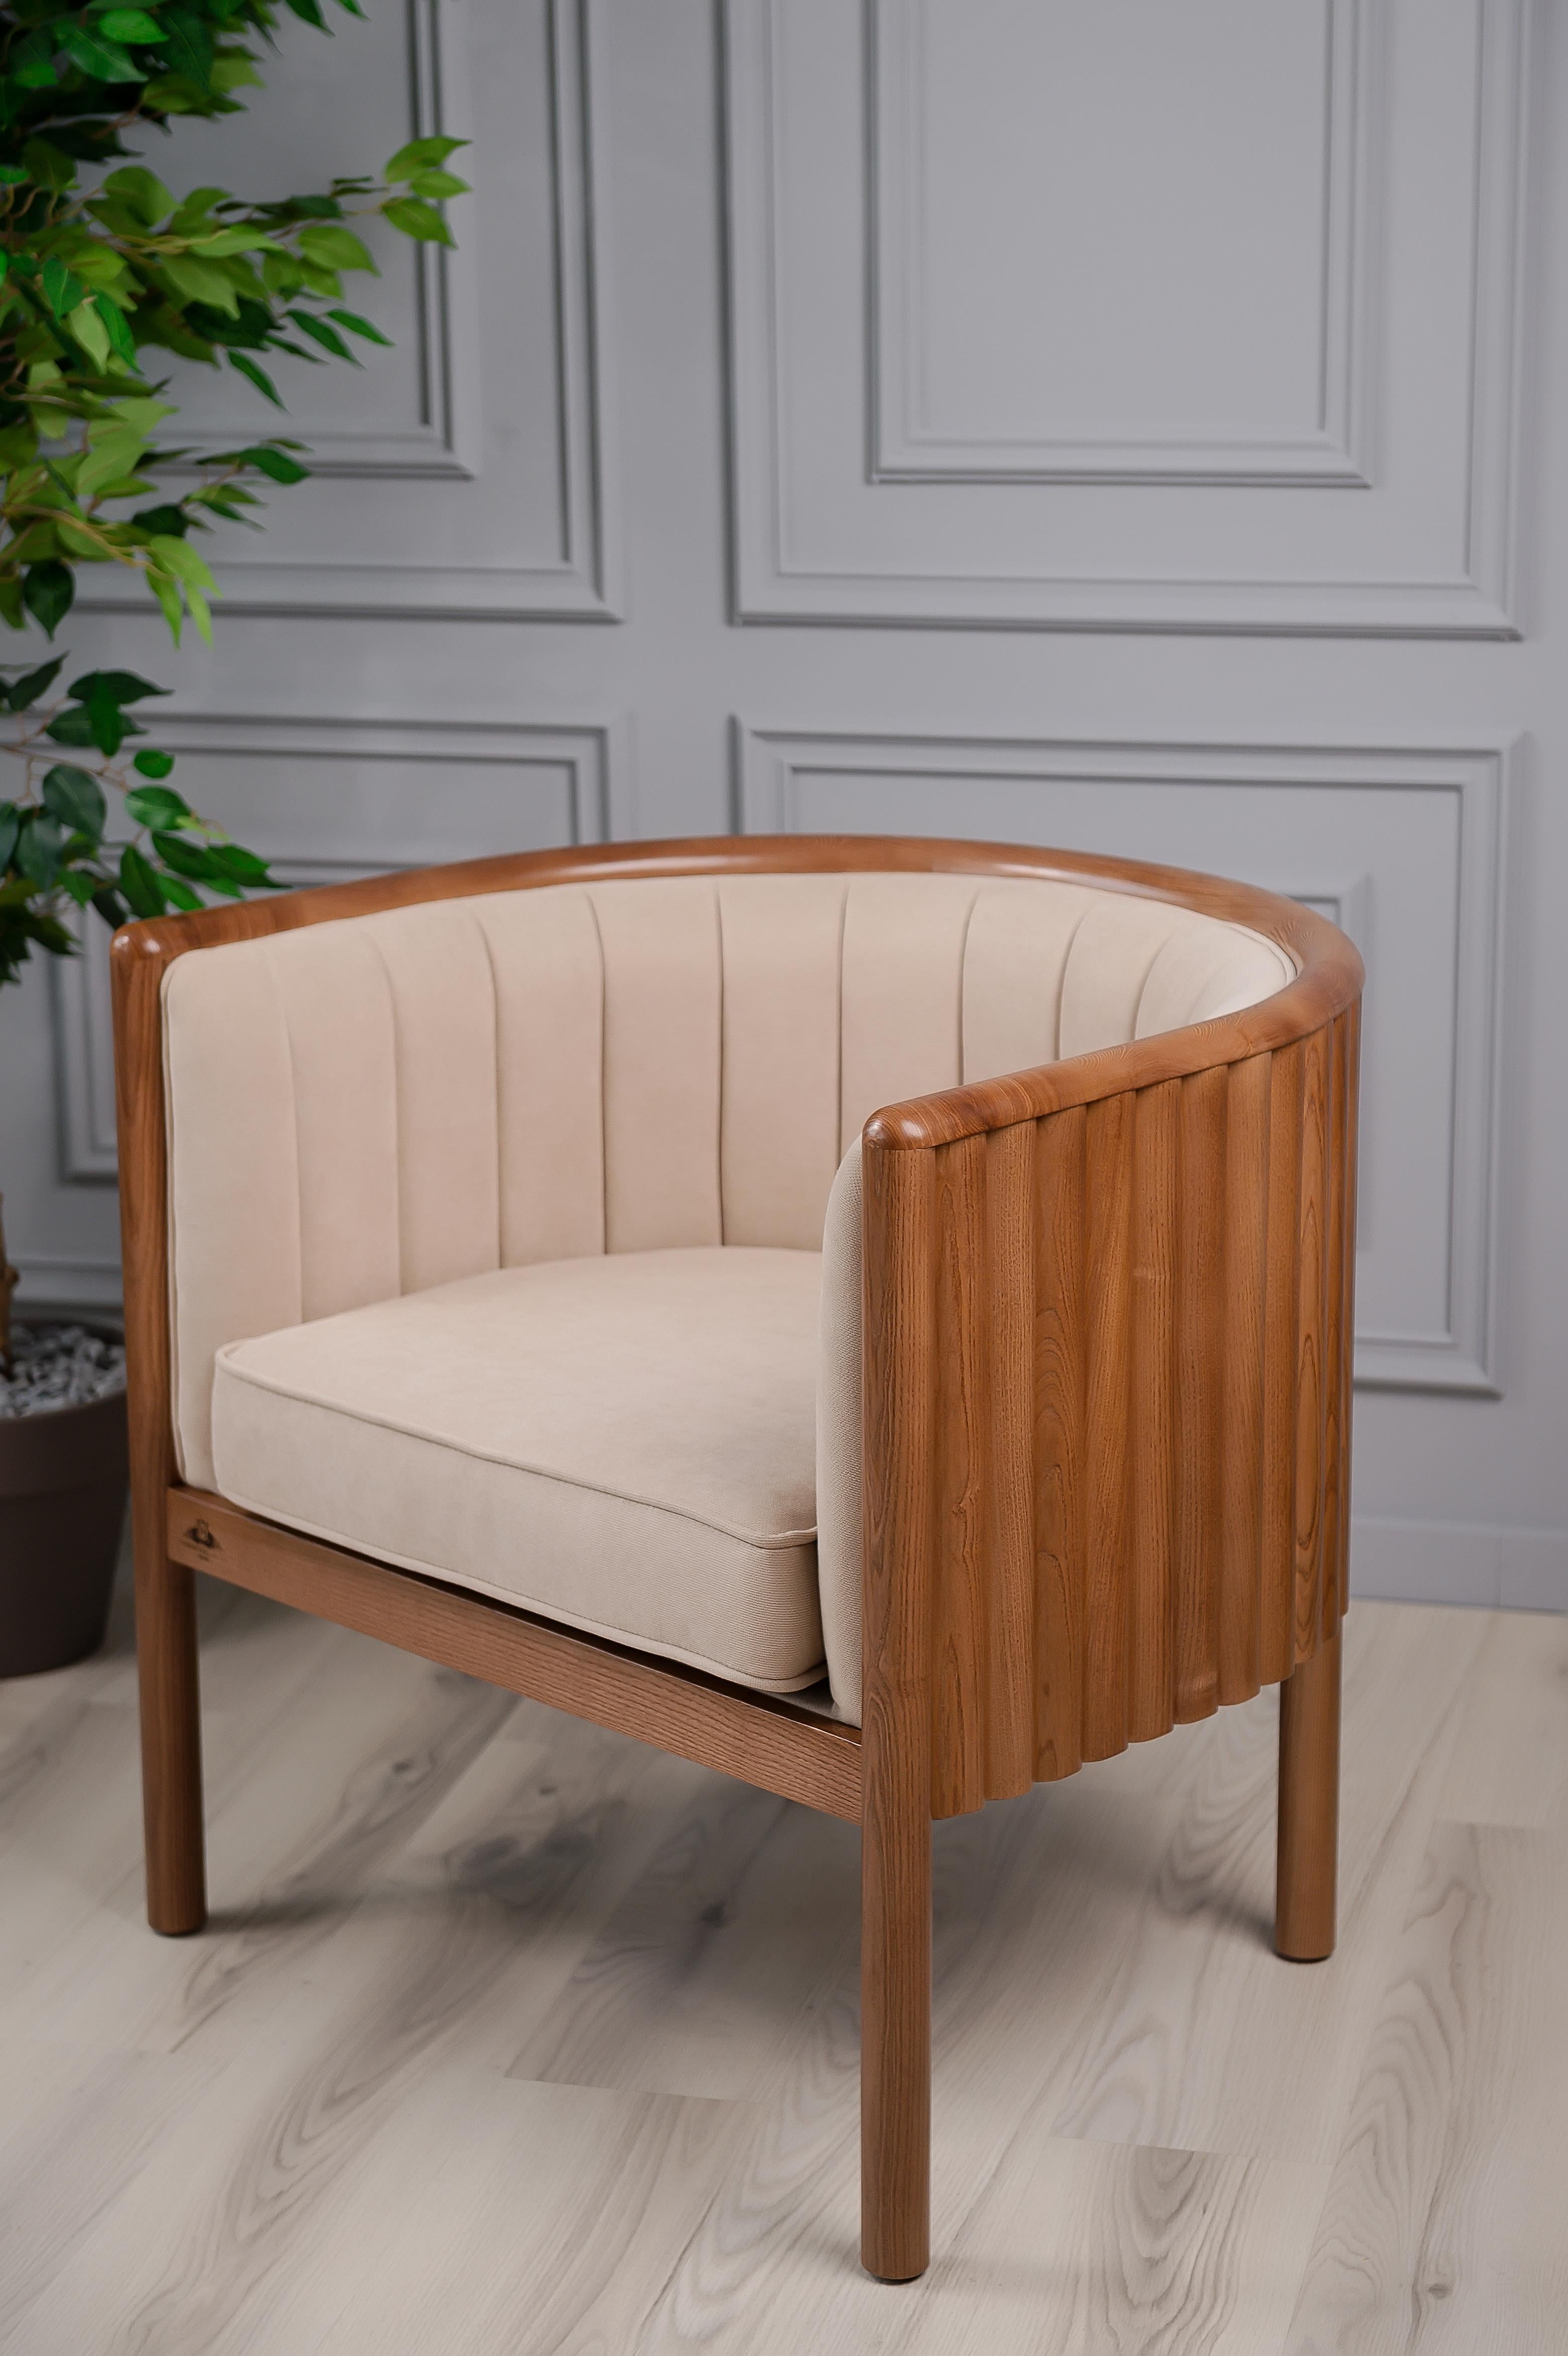 The Alton armchair is the definition of Mid-Century Modern furniture. The cylinder backings offer a unique look that isn’t duplicated in the furniture space. The emerald seat covering add a simple elegance to the piece. The comfort level will